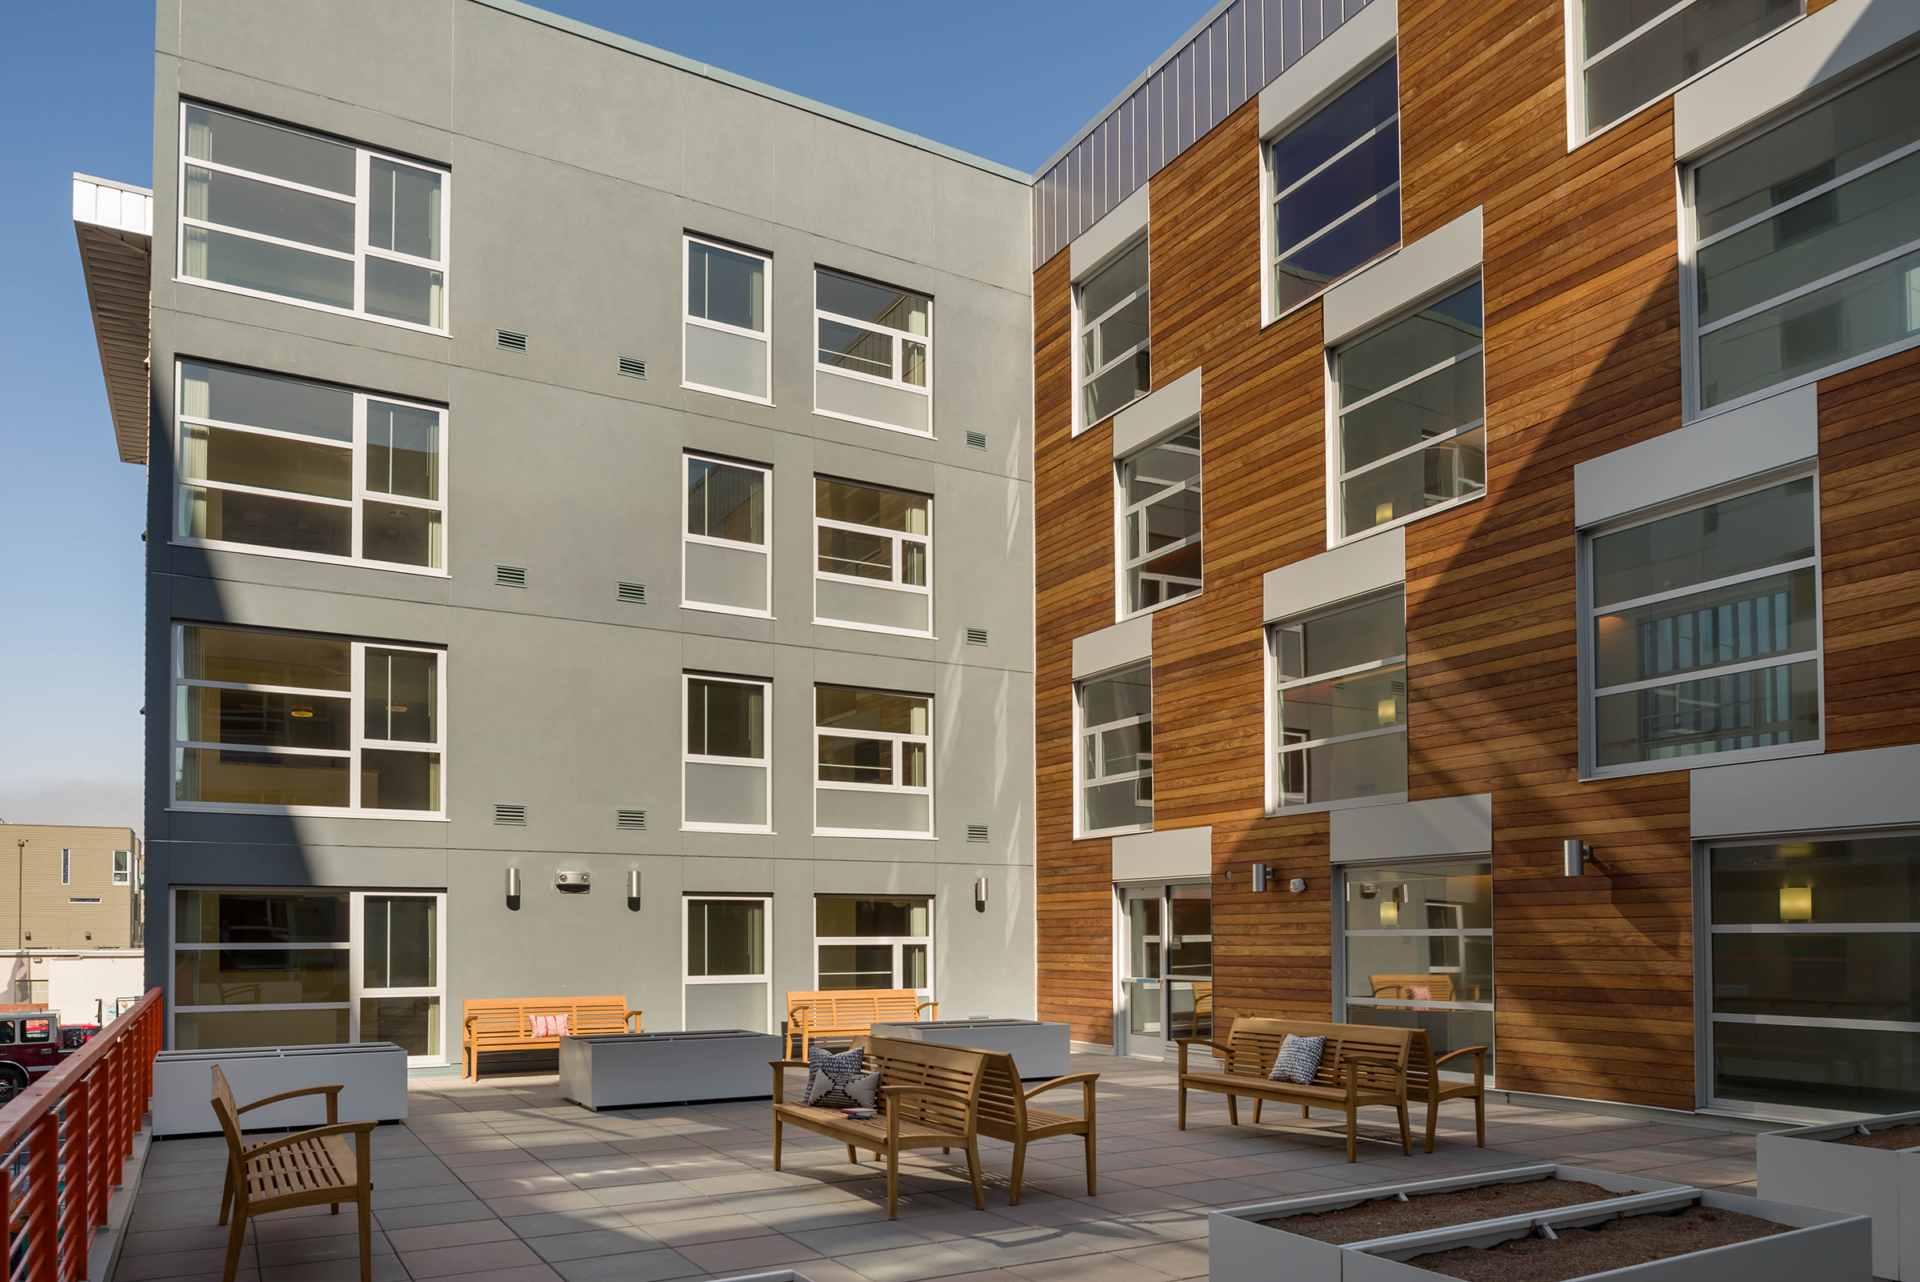 Cahill Contractors Affordable Housing Experience: Willie B. Kennedy Apartments